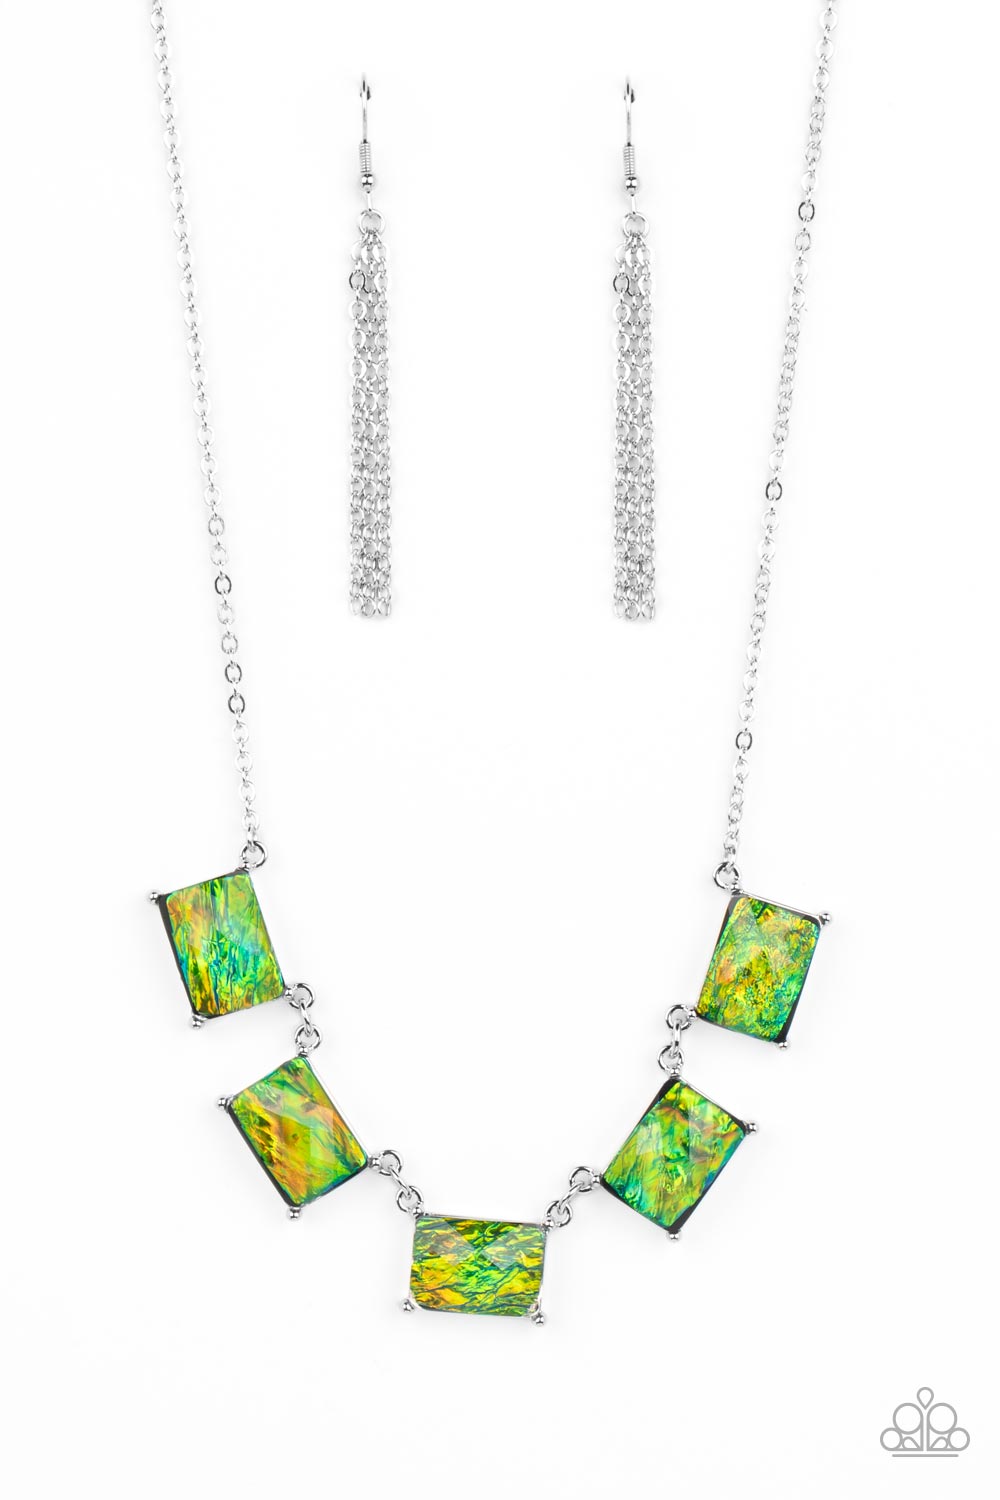 Opalescent Oblivion - Green Gem and Silver Necklace - Paparazzi Accessories - Refracted shimmer and an opalescent finish, a collection of emerald-cut, glassy green gems link along the collar to create a hypnotic pop of color. Each gem is pressed into a silver frame with pronged fittings, bringing a touch of metallic grit to the design necklace.